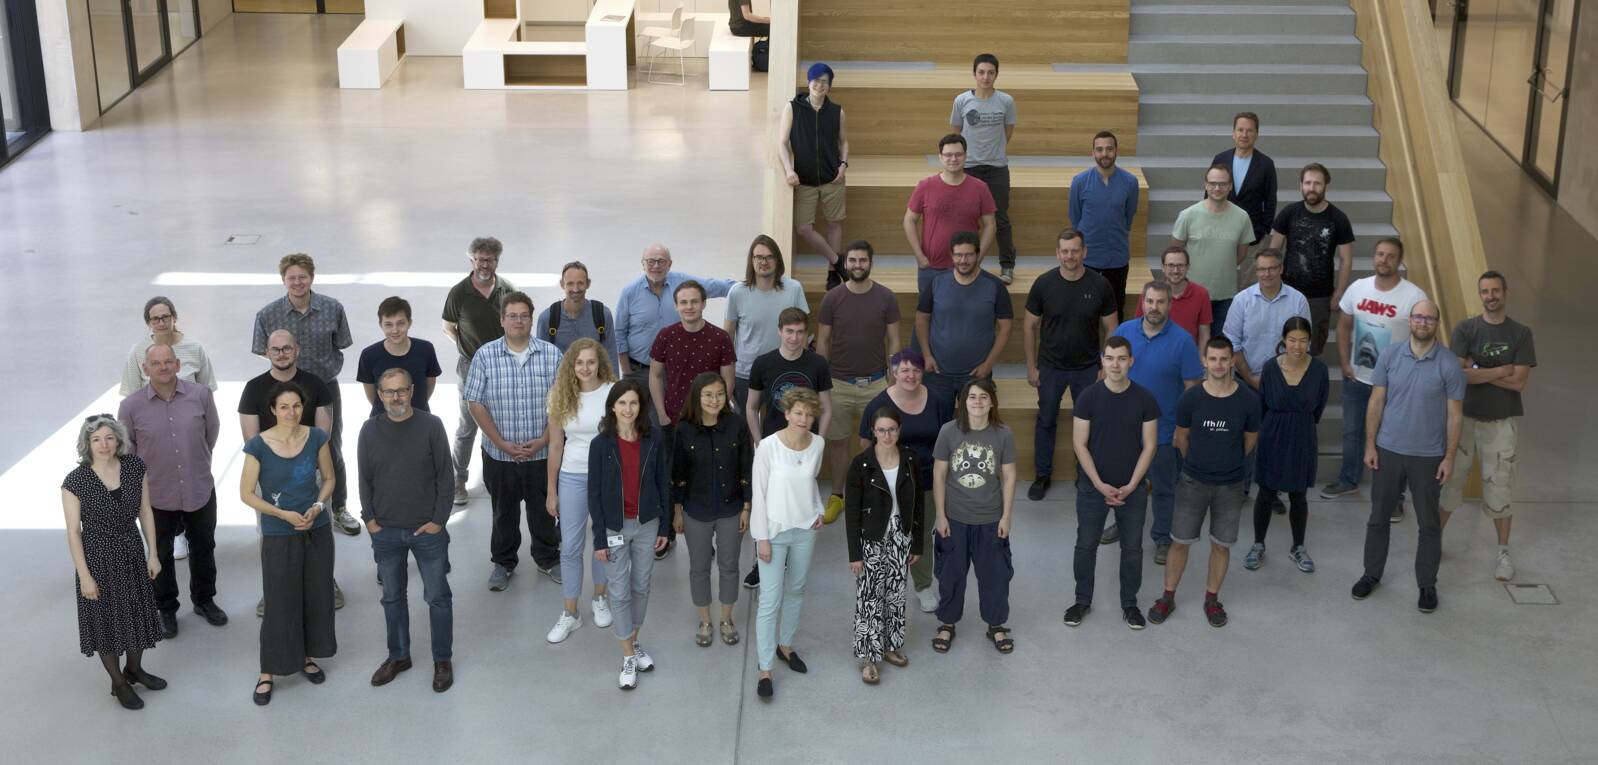 Team photo of members of the Institute of Creative Media Technologies